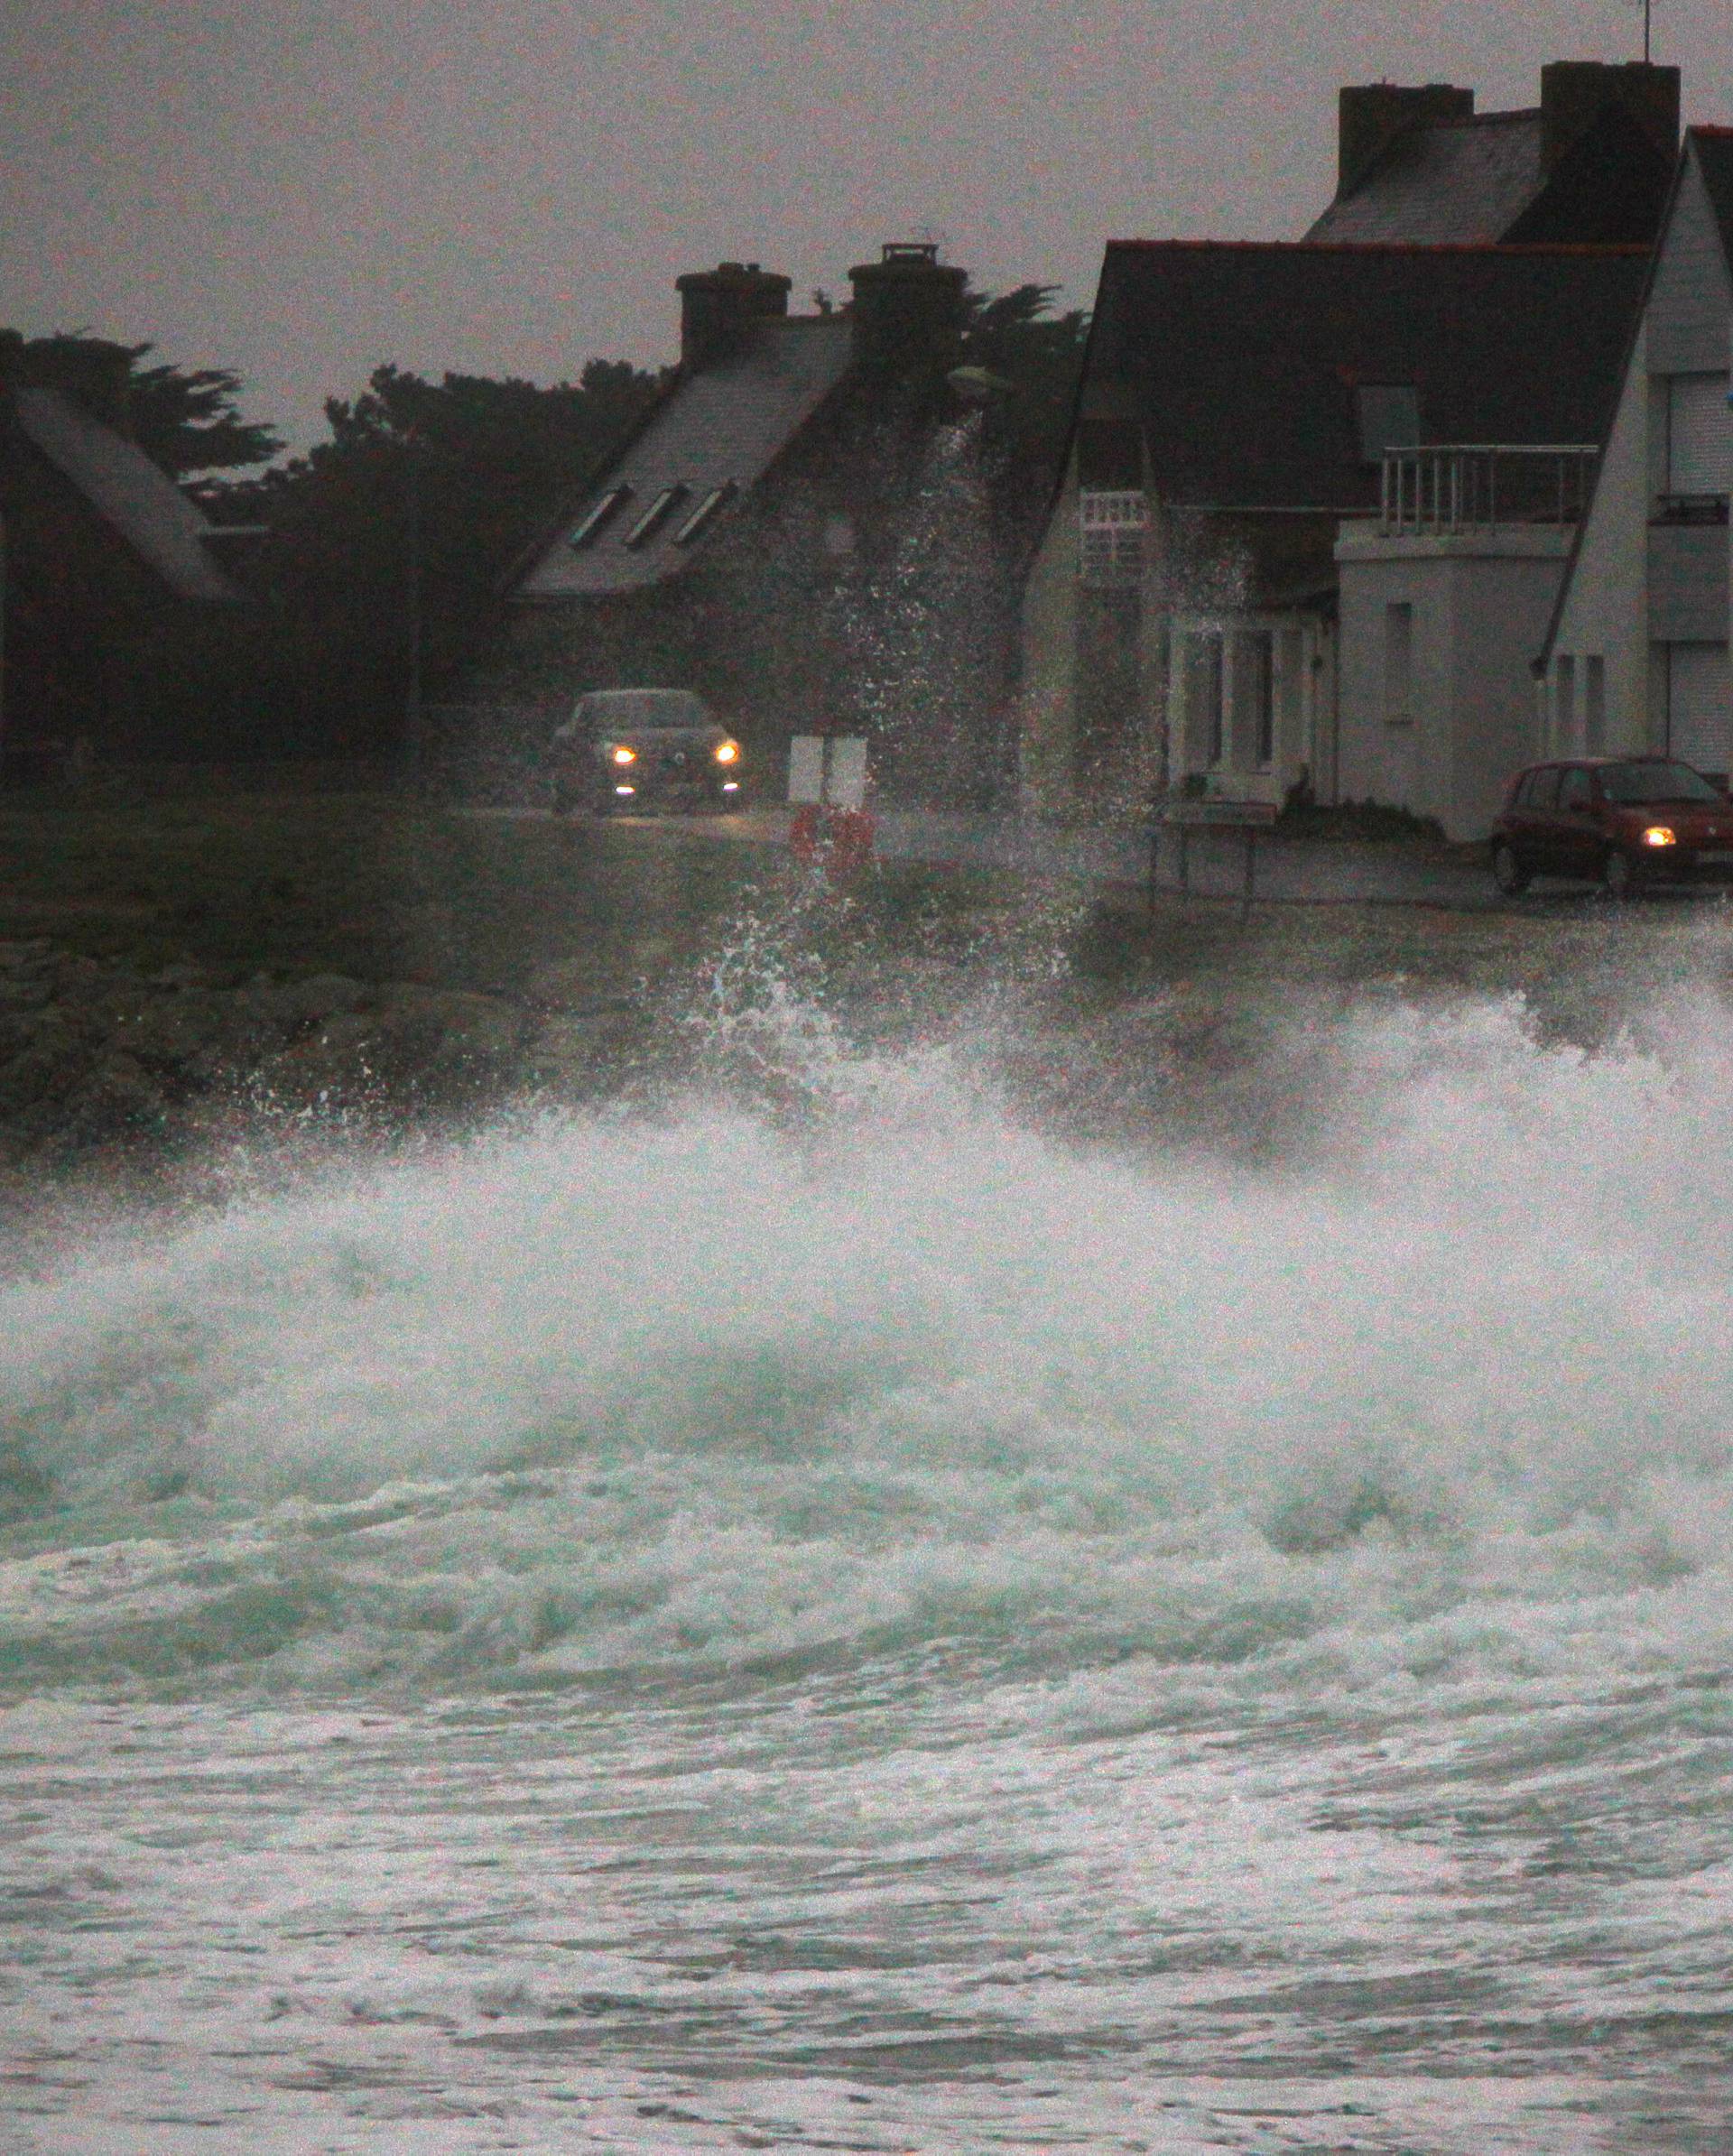 Cars drive past waves breaking on the Brittany coast after storm Eleanor hit Saint-Guenole